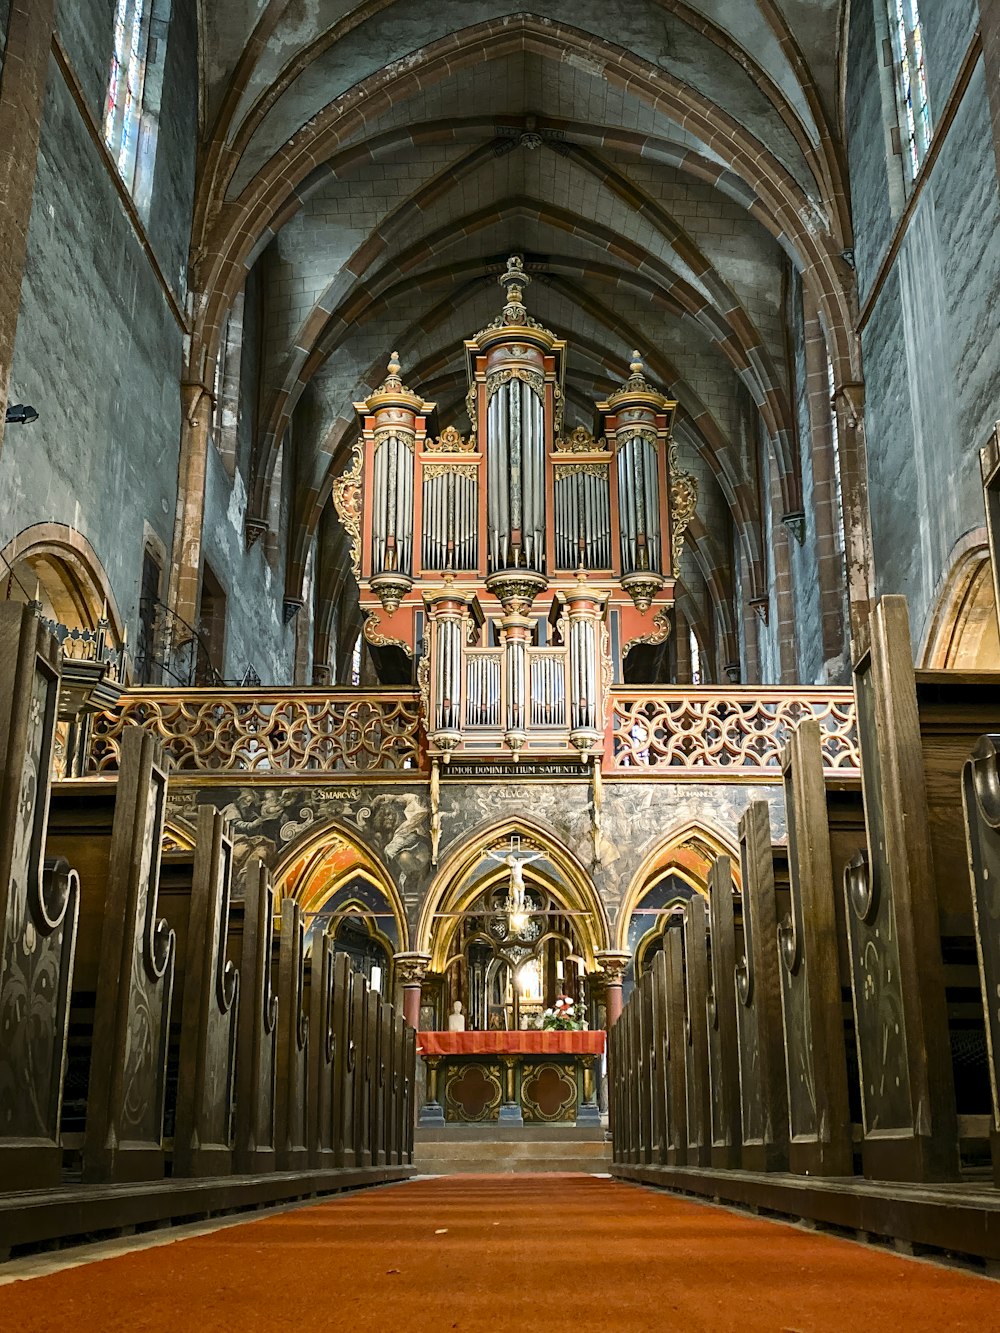 a large ornate building with a large organ in the middle